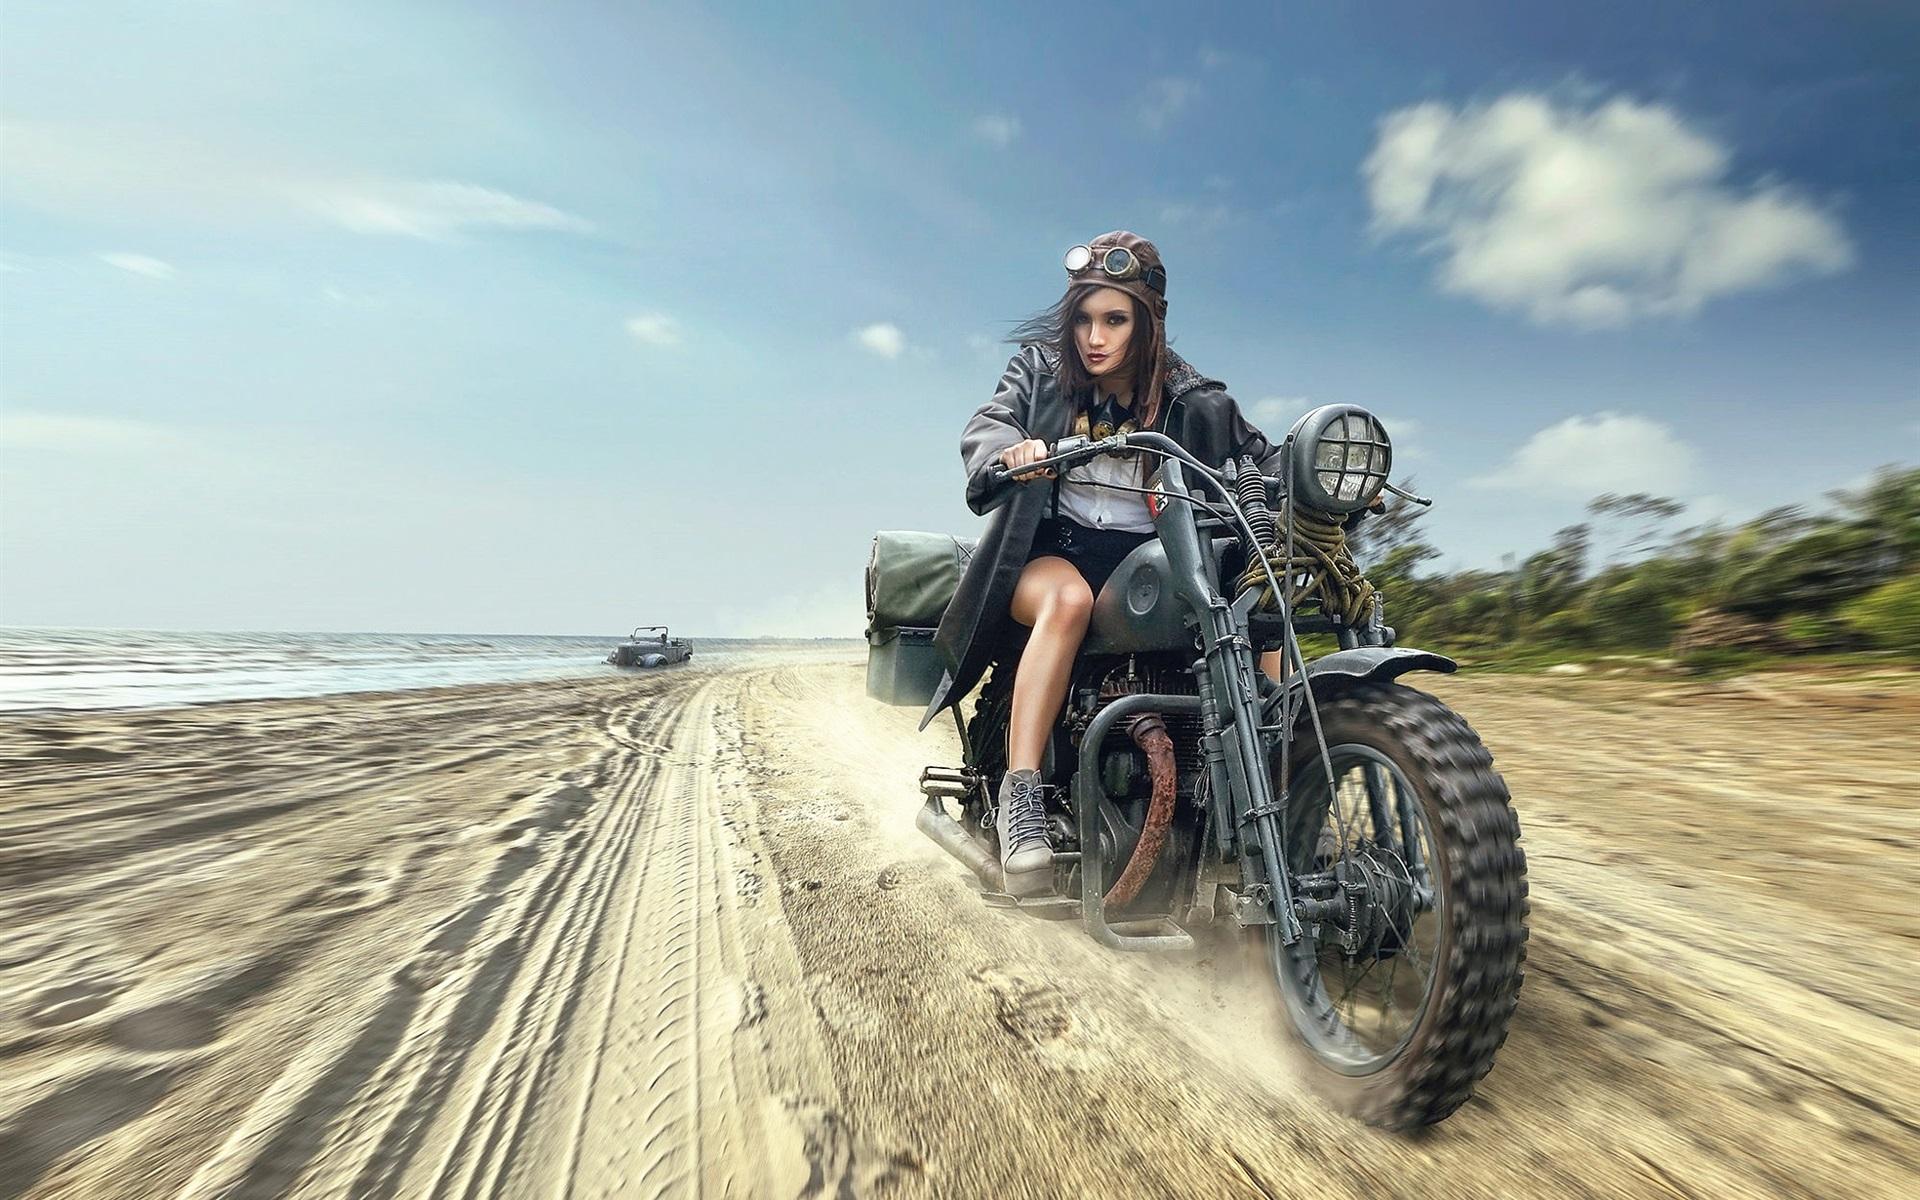 Wallpaper Girl riding motorcycle at beach 1920x1200 HD Picture, Image